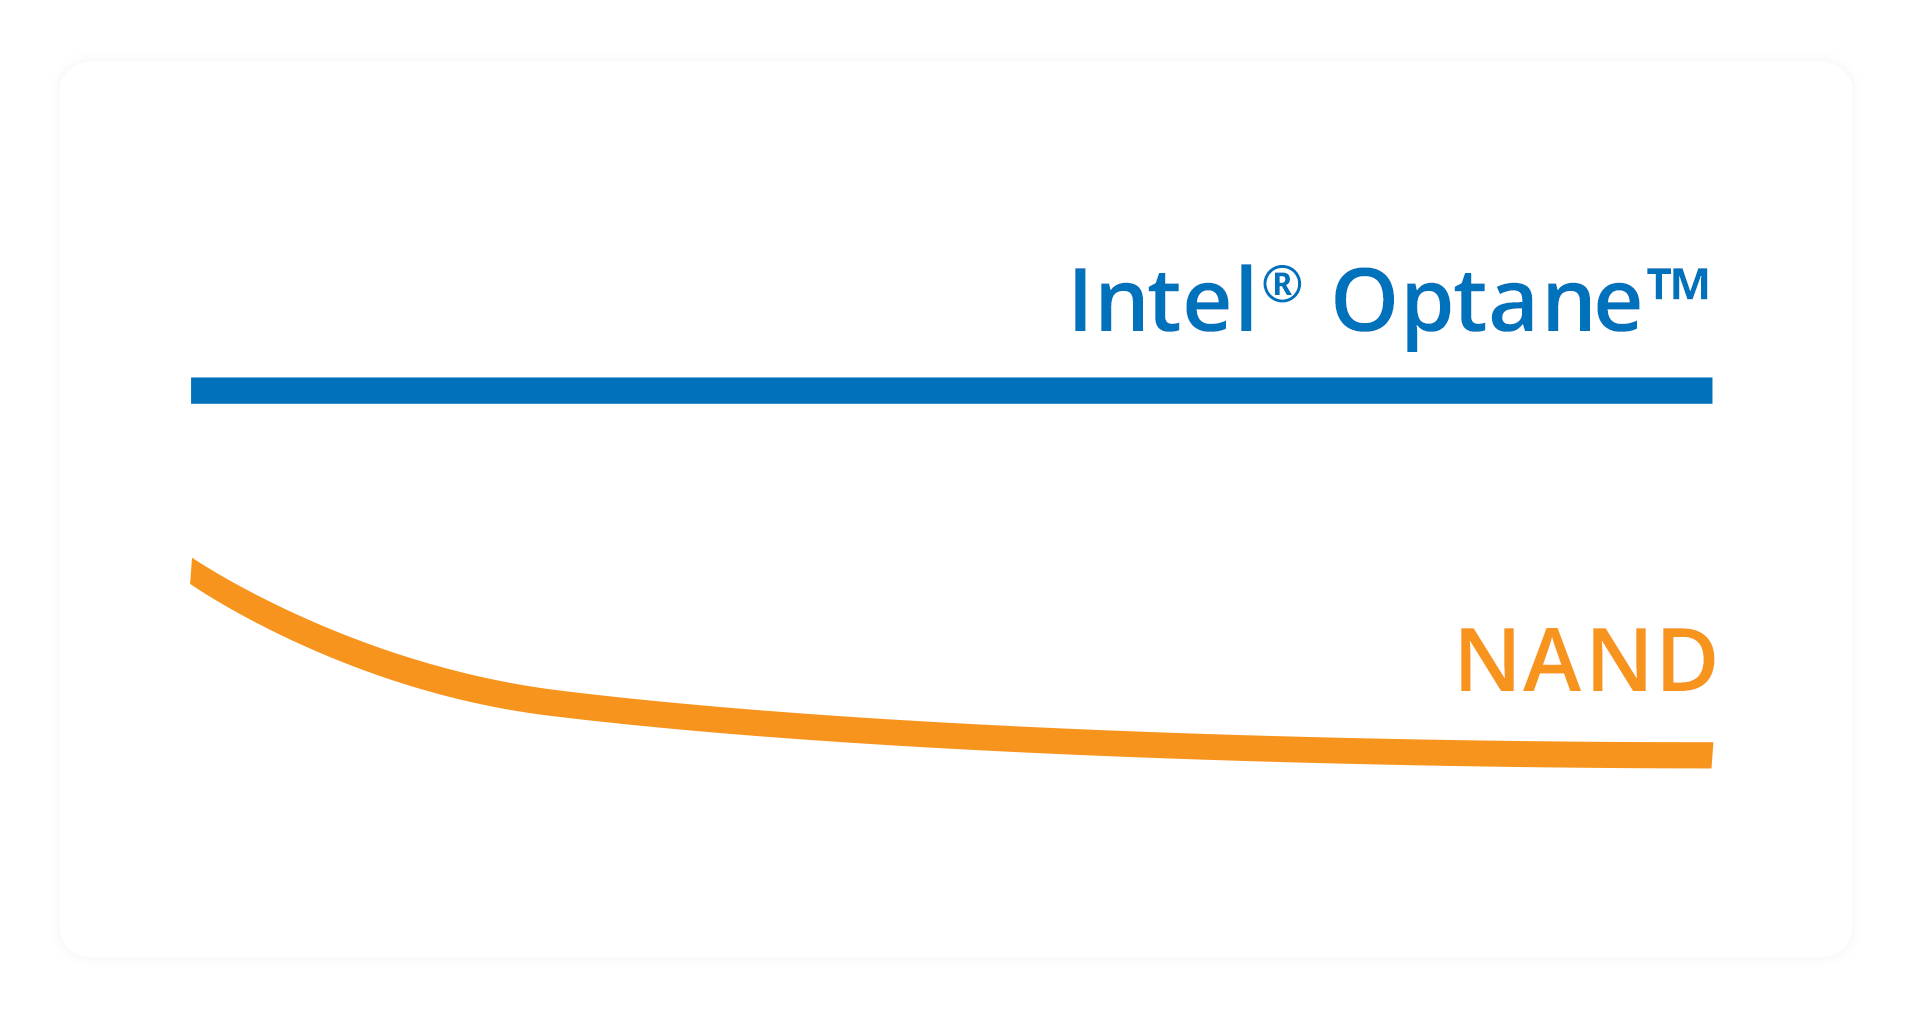 Graph comparing difference between Intel Opaten (blue line) and NAND (yellow line)